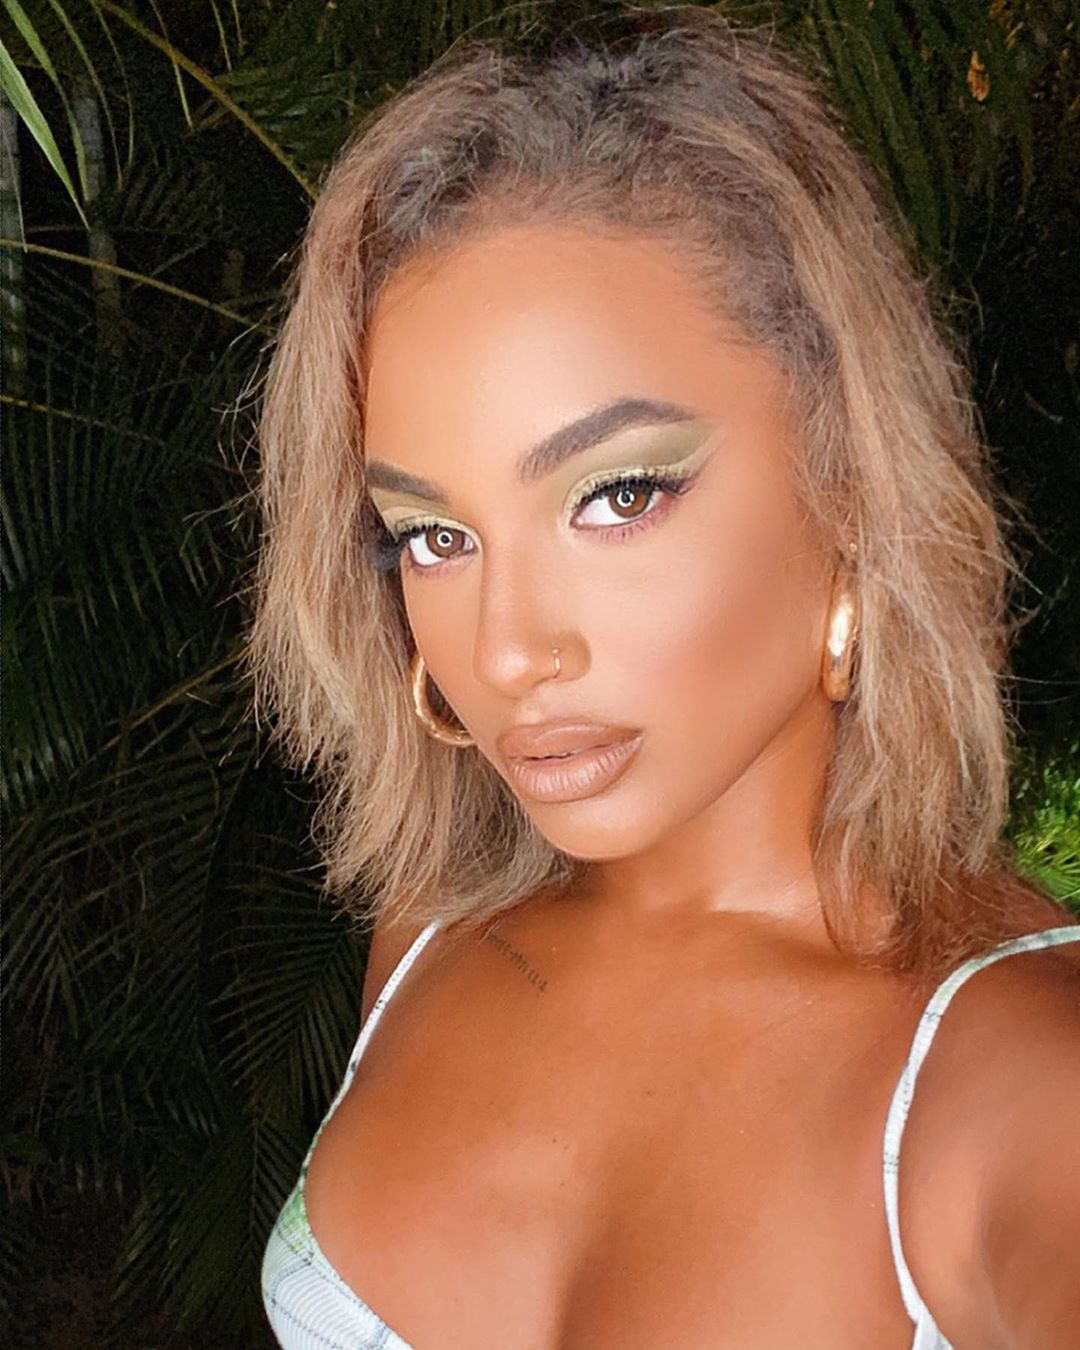 Rico Nasty, Vanessa Simmons, Tyra And Other Celebrity Beauty Looks Of The Week